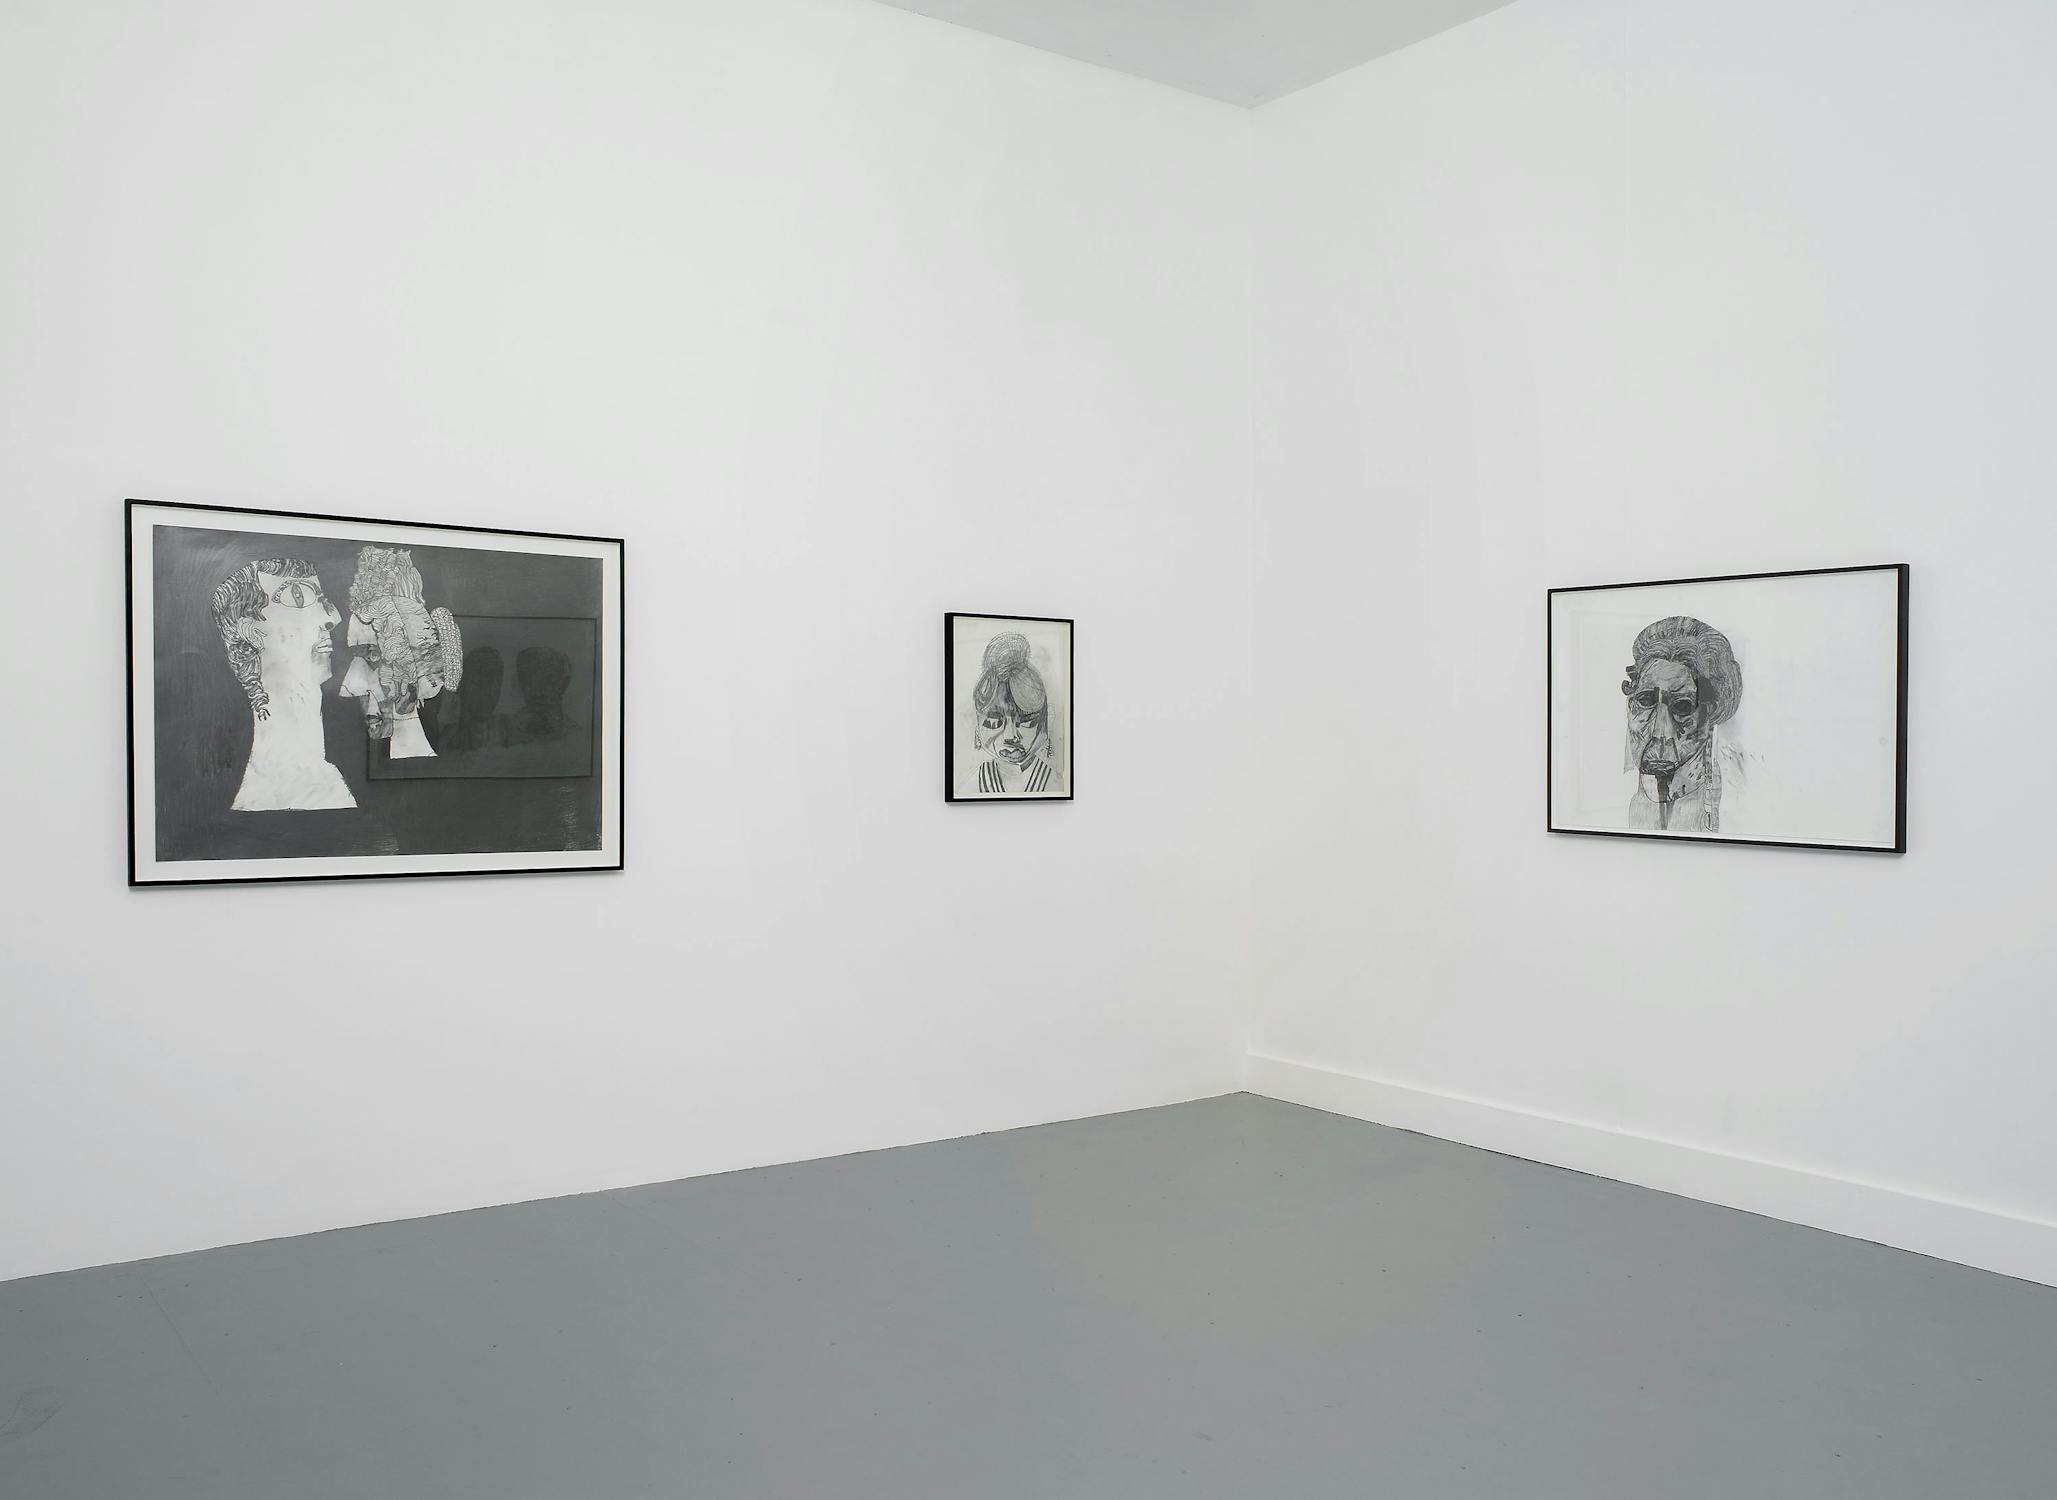 Three pencil drawings of figures with exaggerated features on white paper with black frames, hung in the corner of a white-walled gallery